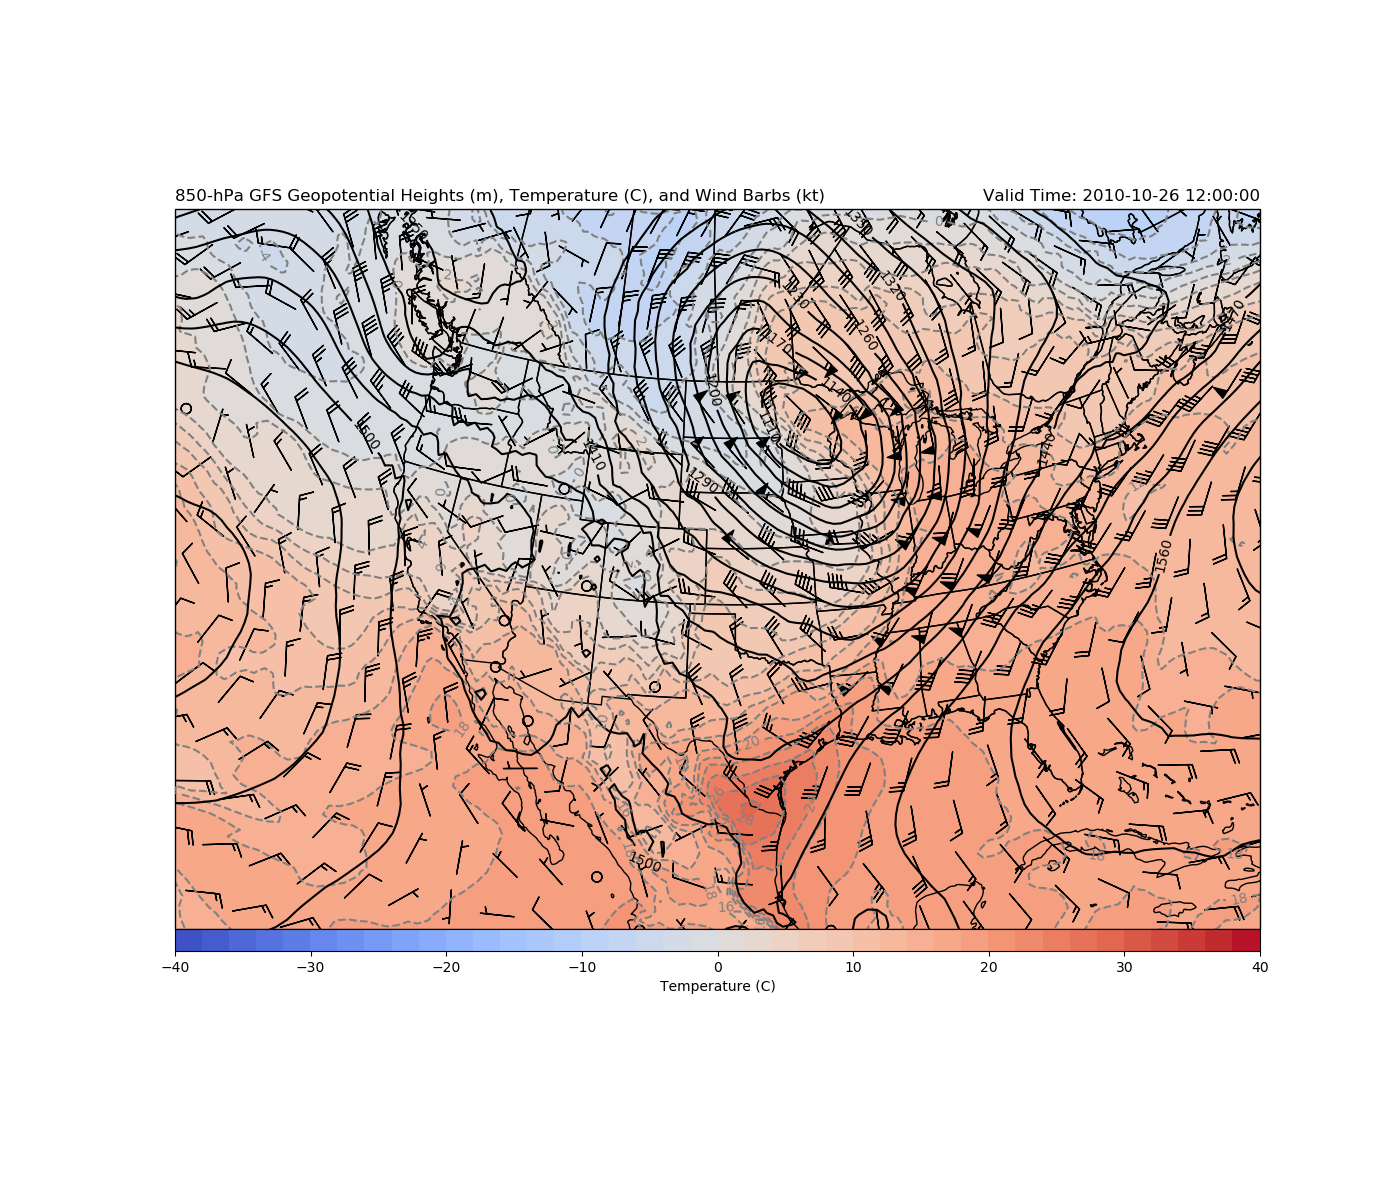 ../_images/sphx_glr_850hPa_TMPC_Winds_001.png